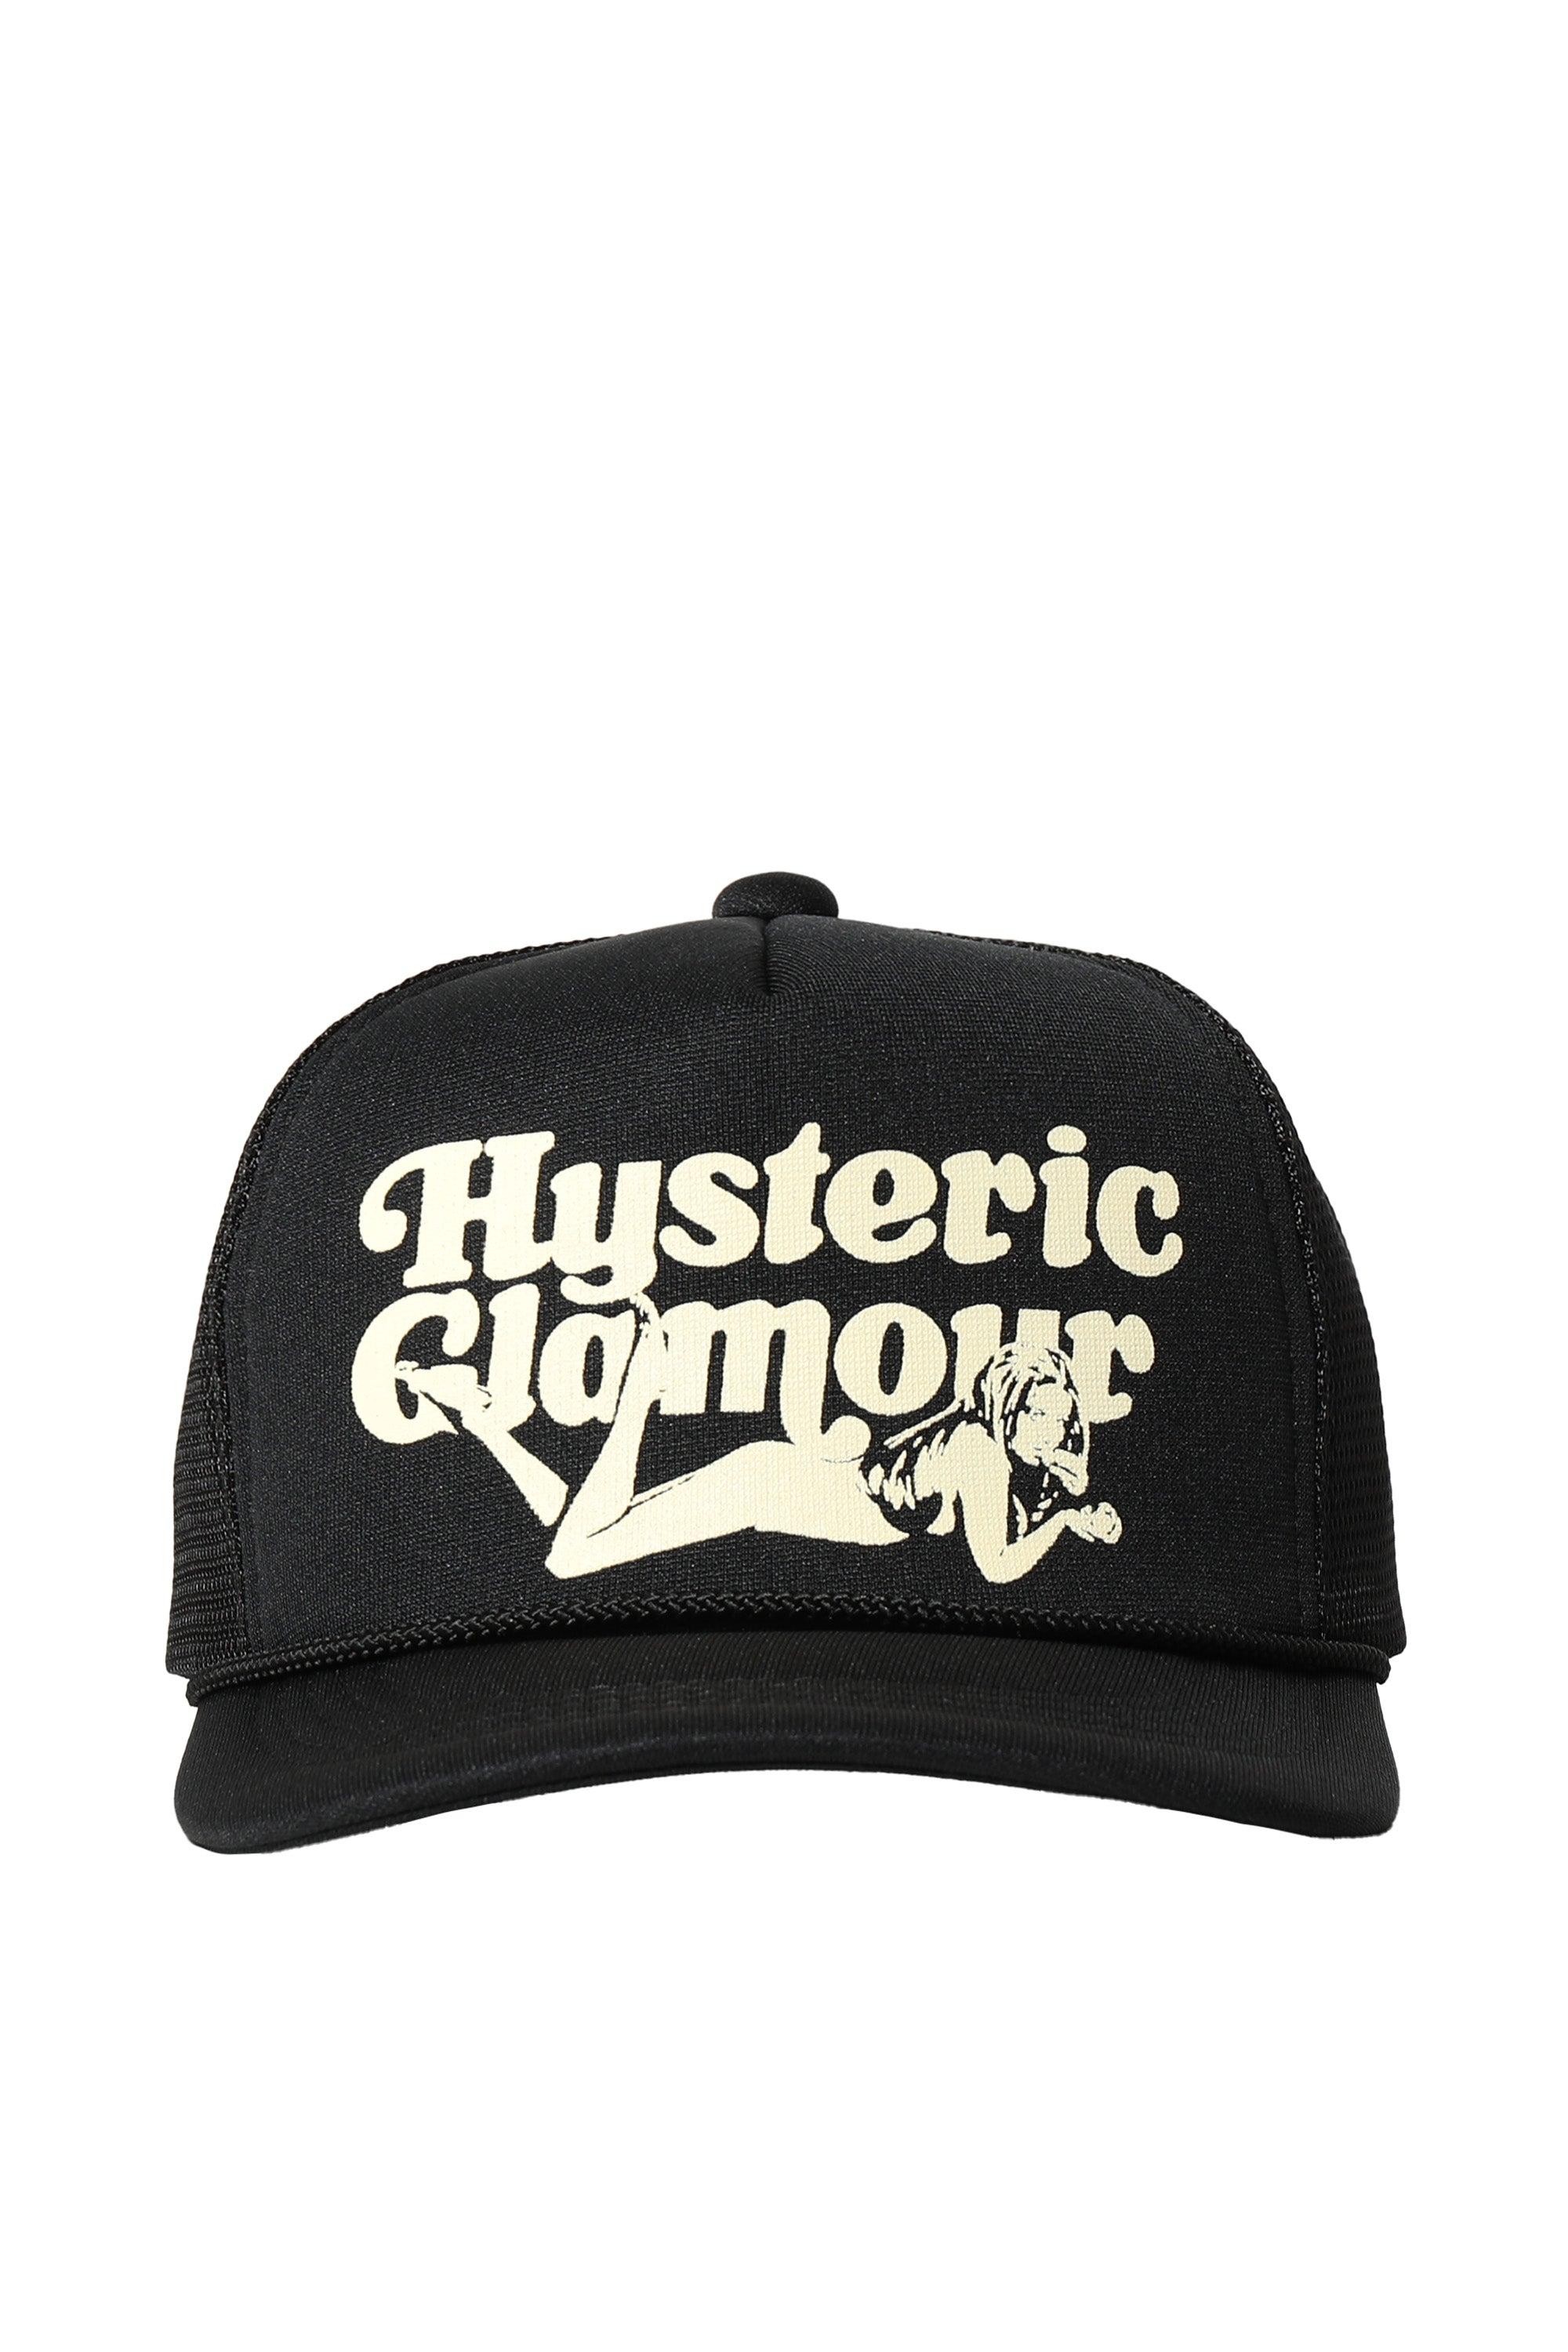 Hysteric Glamour Lie Down Girl Mesh Cap in Black | Lyst